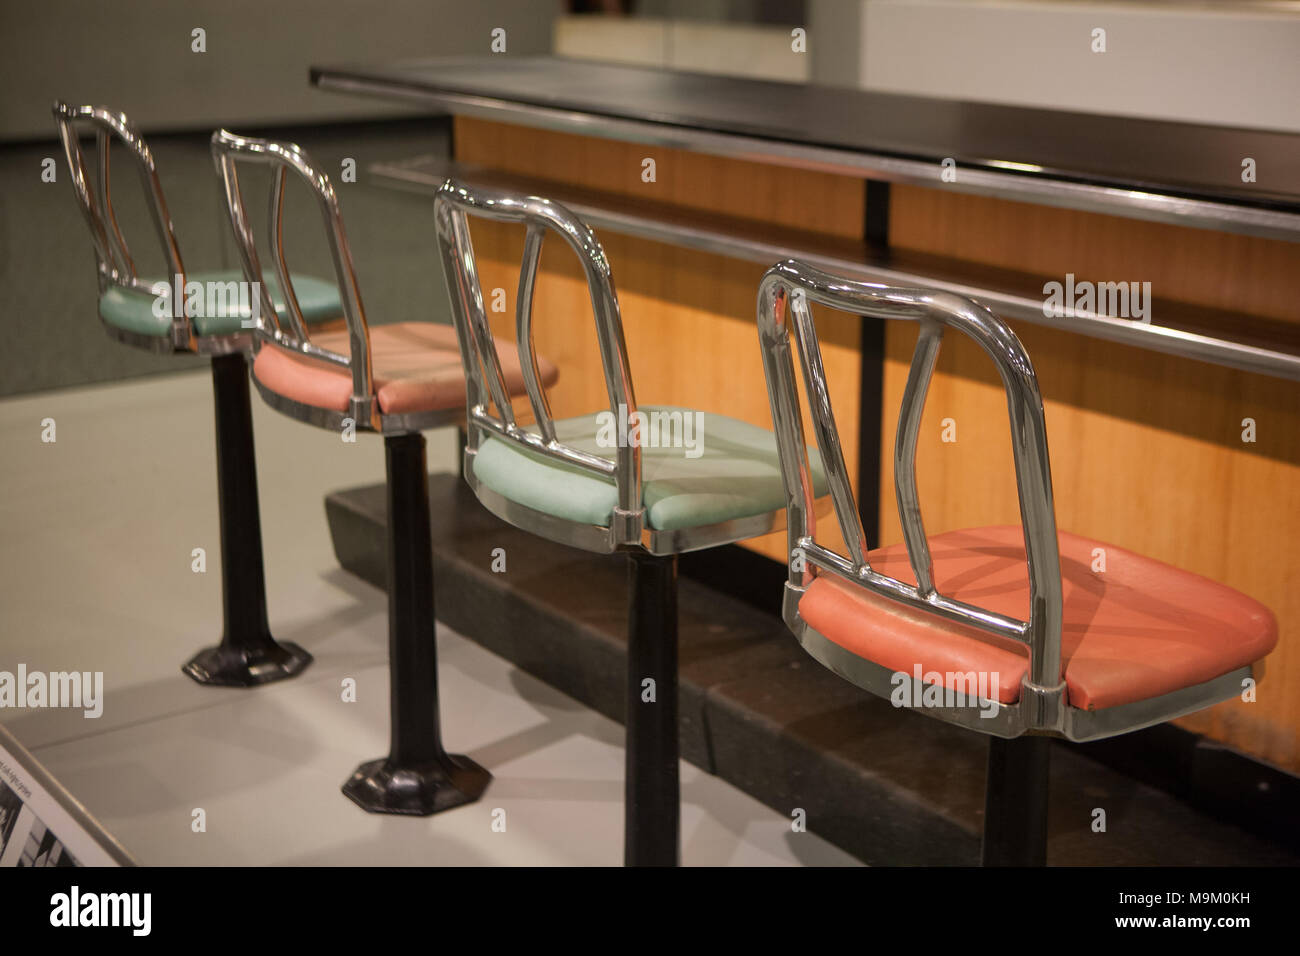 Woolworth Lunch Counter Stock Photos & Woolworth Lunch Counter Stock Images - Alamy